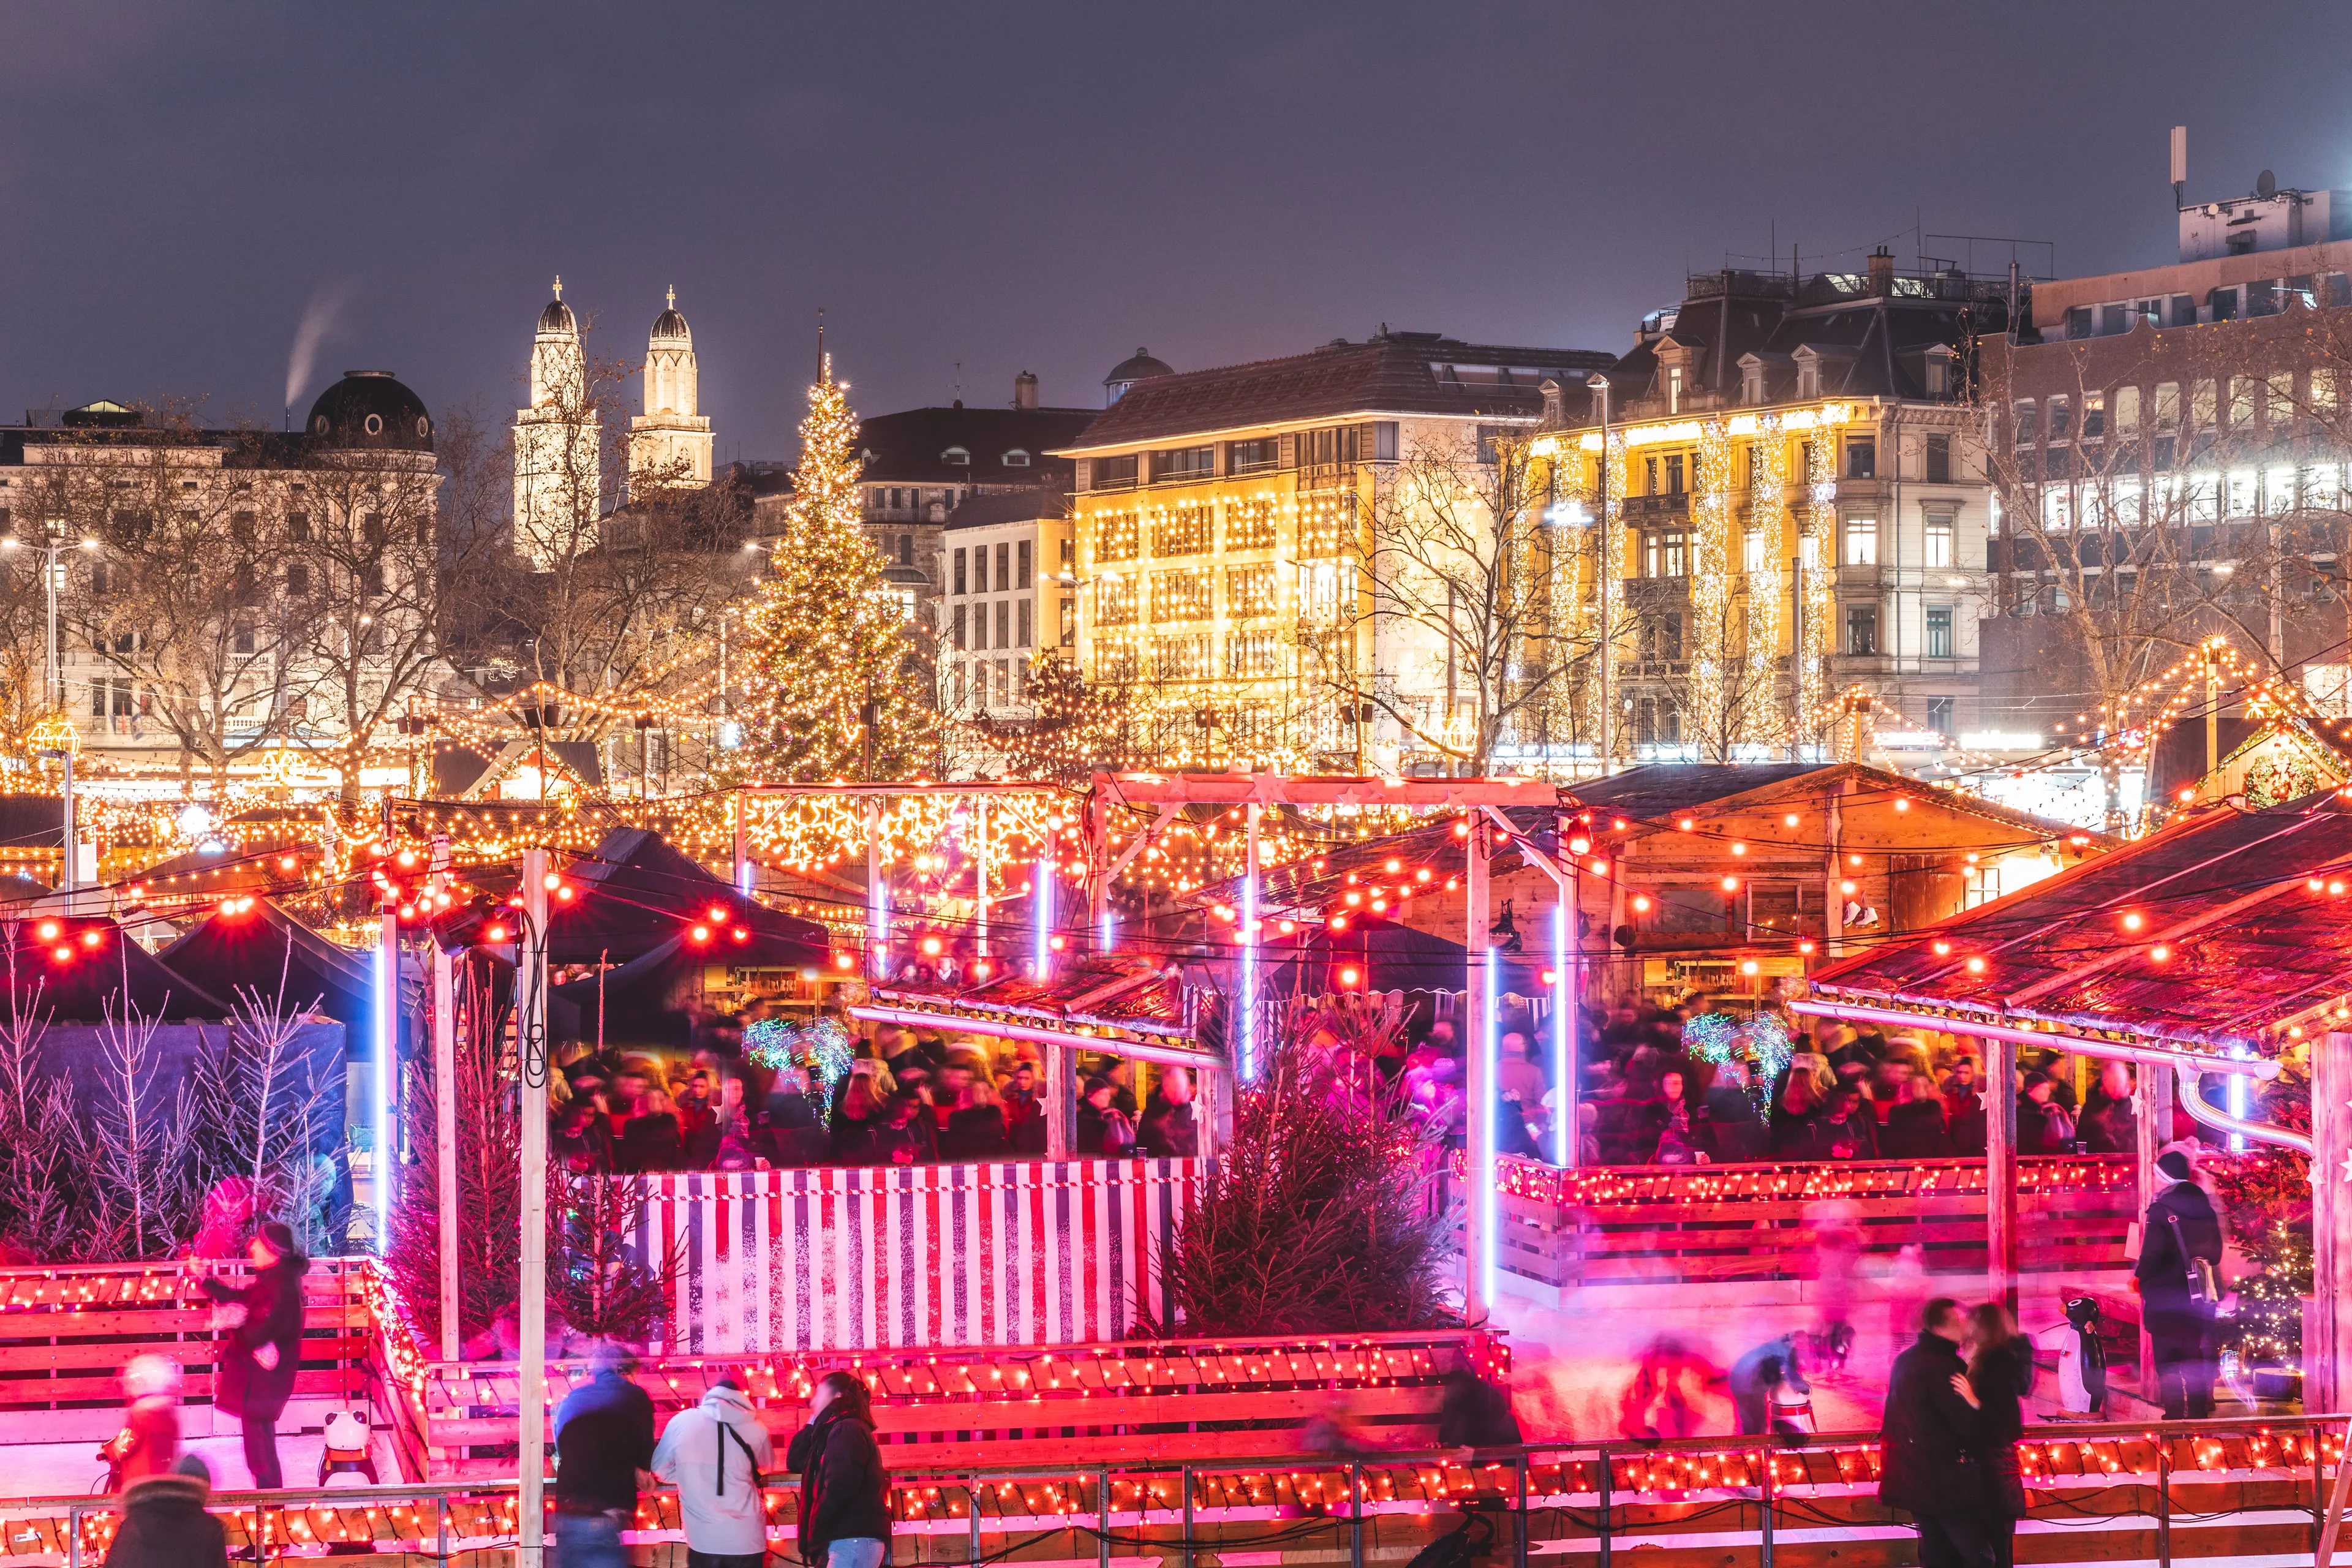 3-Day Family Christmas Holiday Itinerary in Zurich, Switzerland